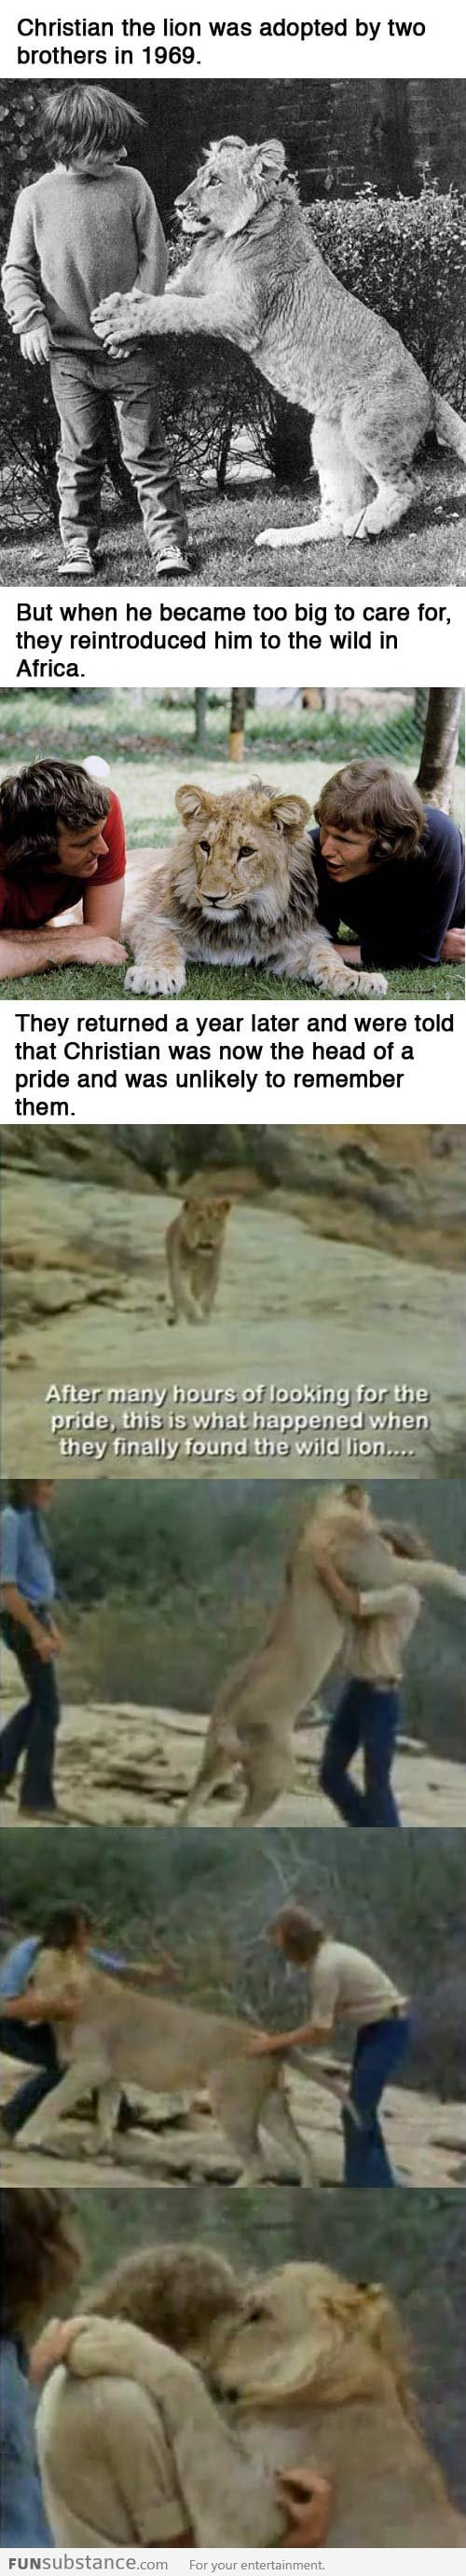 The Story of Christian the Lion